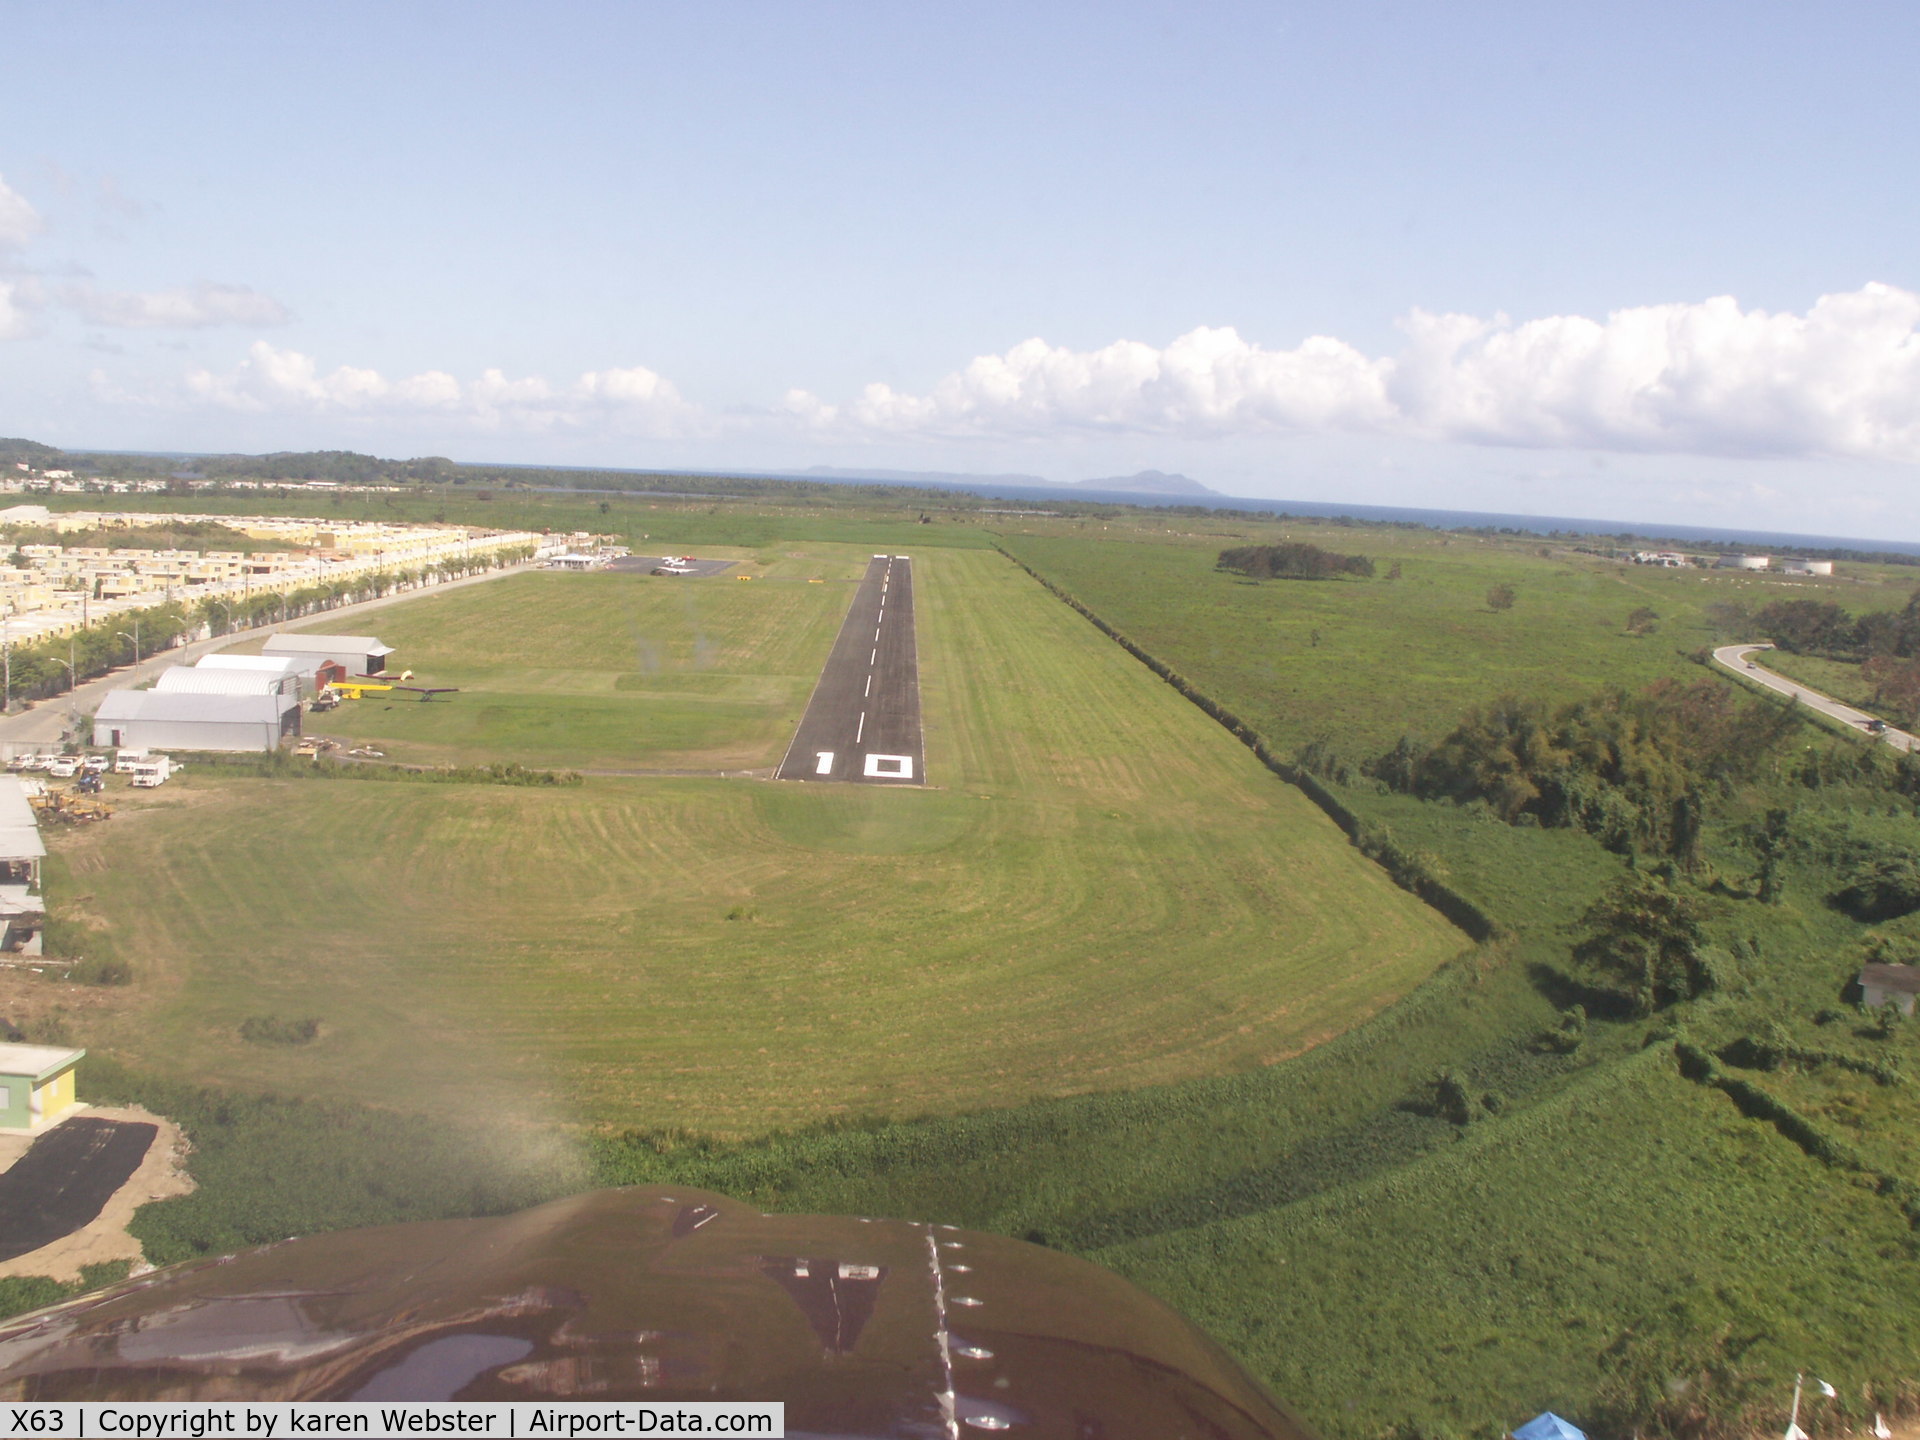 Humacao Airport (X63) - Approach to runway 10 at Humacao PR